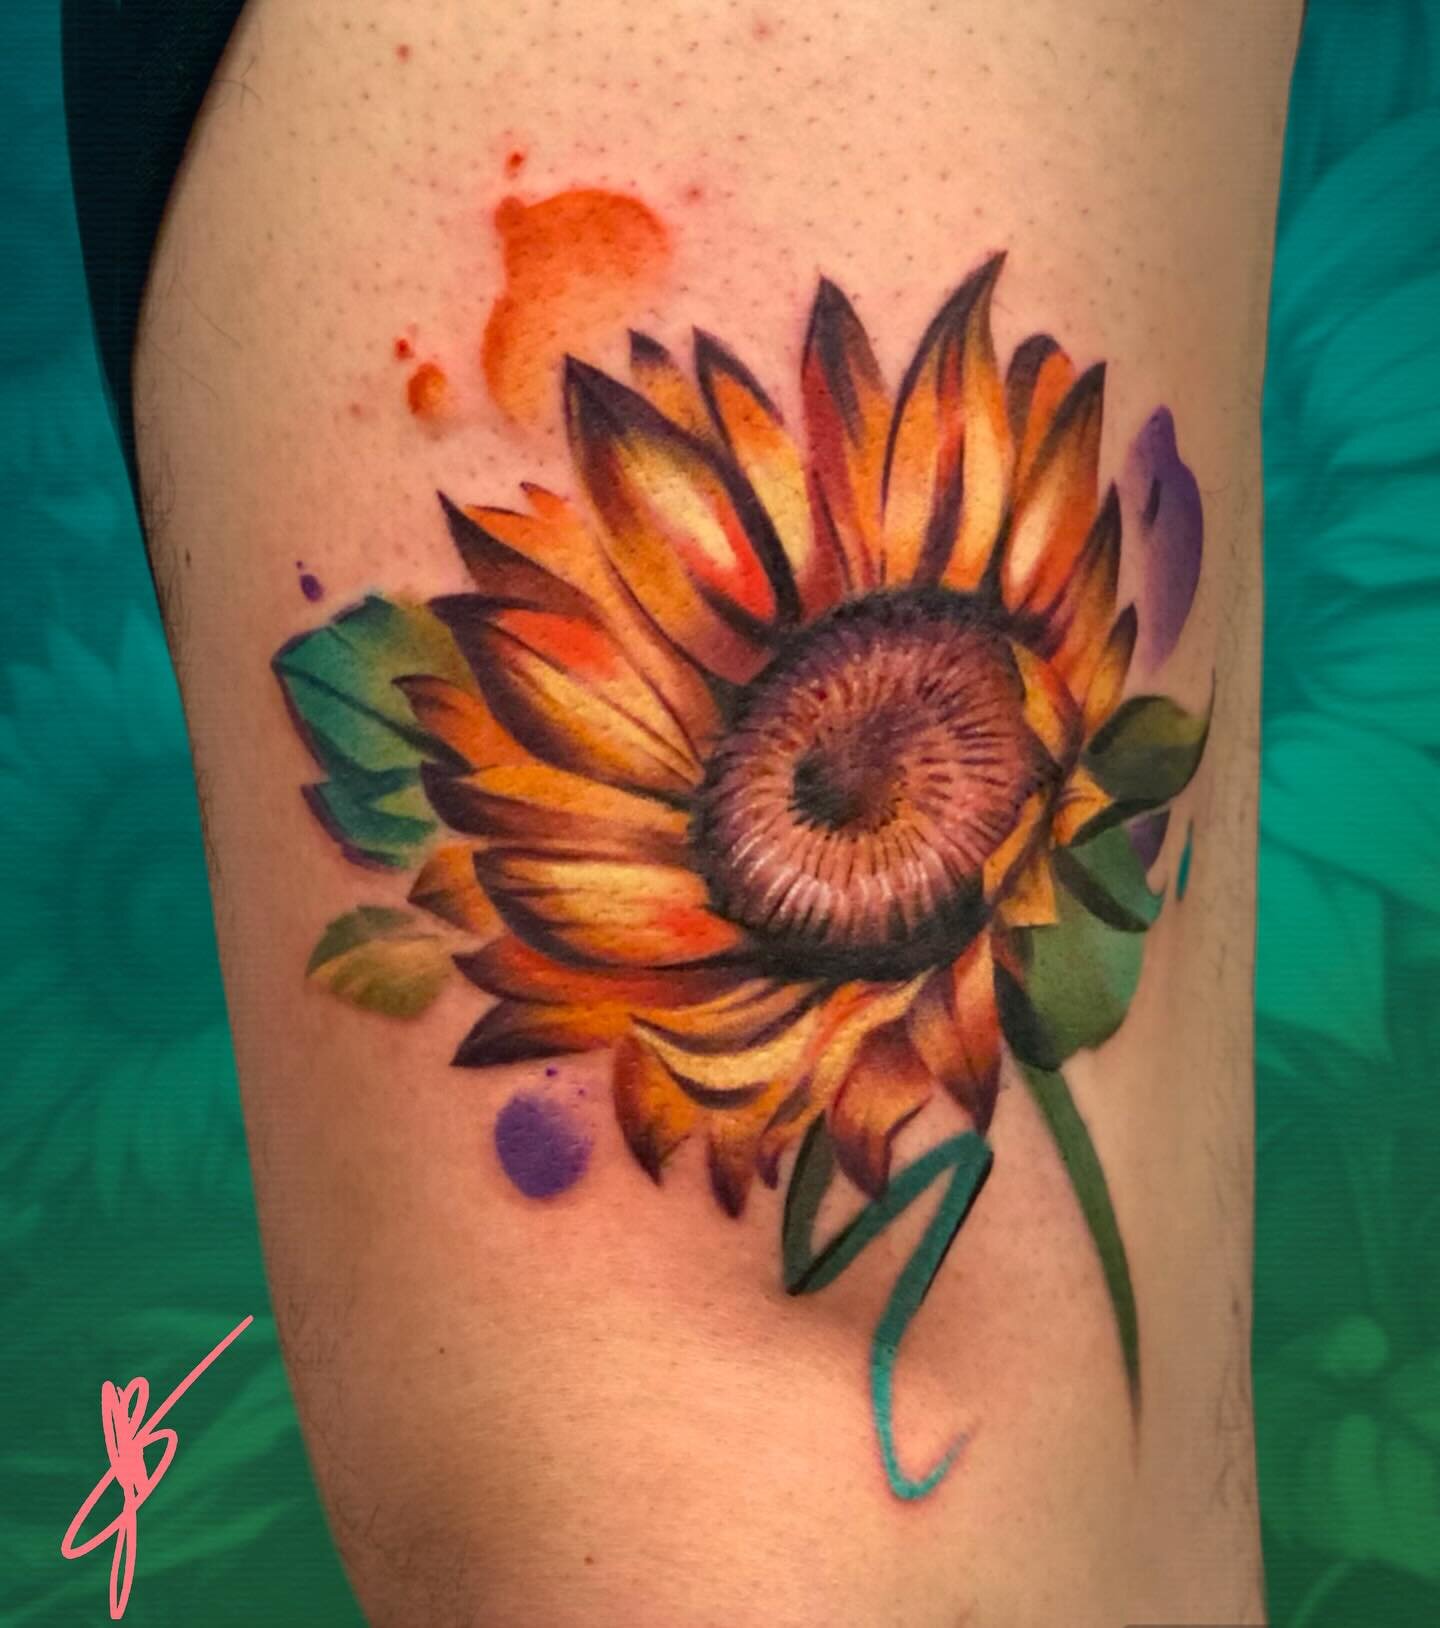 I enjoyed tattooing this sunflower and am happy with the way it turned out. The support bright orange bits here and there are my favorite.  #flower #flowertattoo #nature #tattooer #tattooshop #tattooartist #tattoosnearme #sunflower